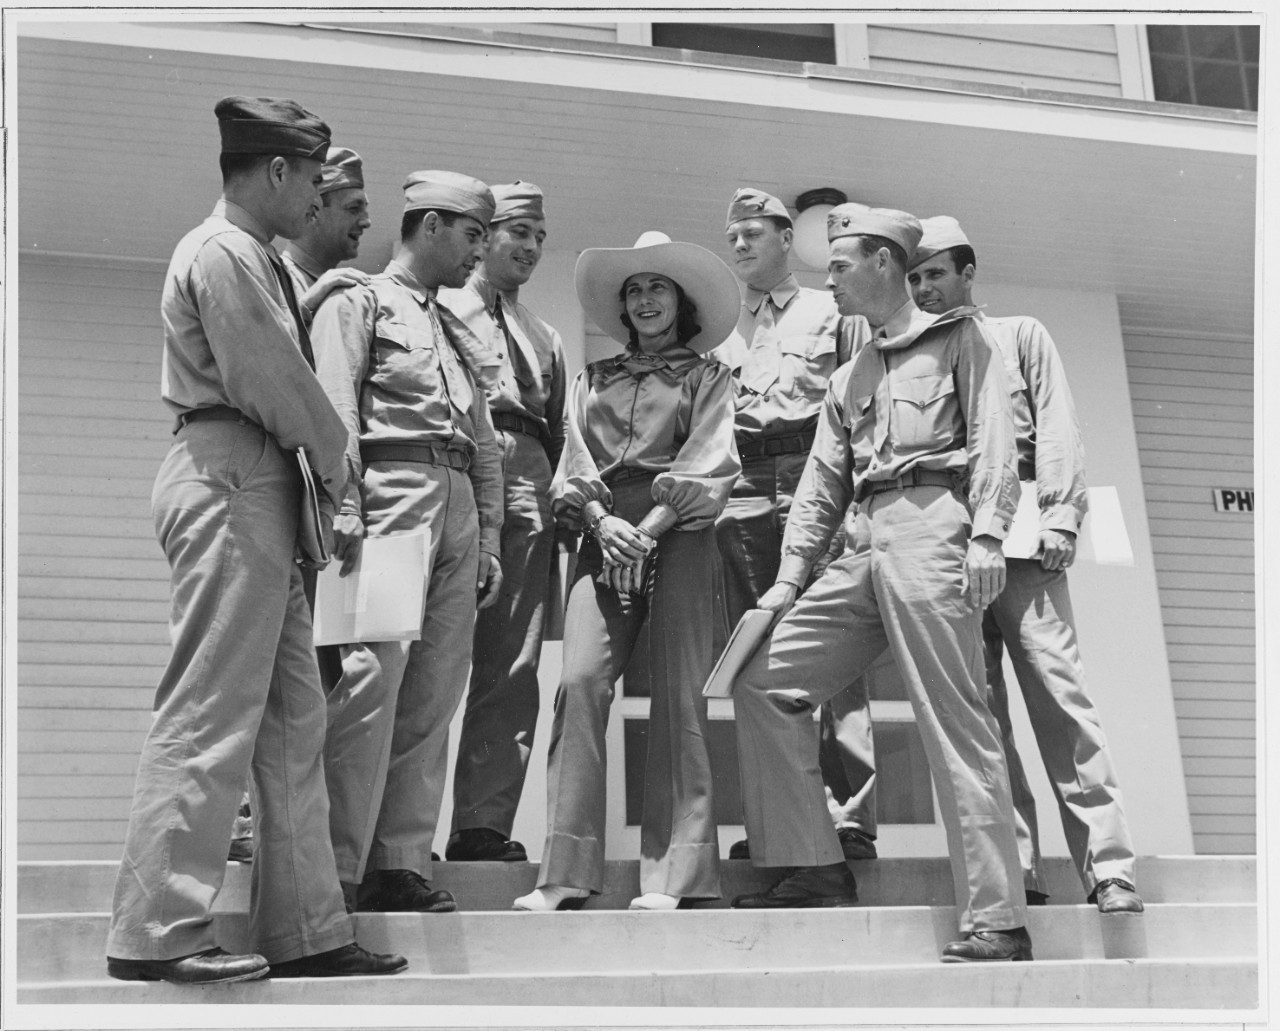 Miss Alice Greenough, International Radio Performer chats with Aviation cadets, May 1, 1941